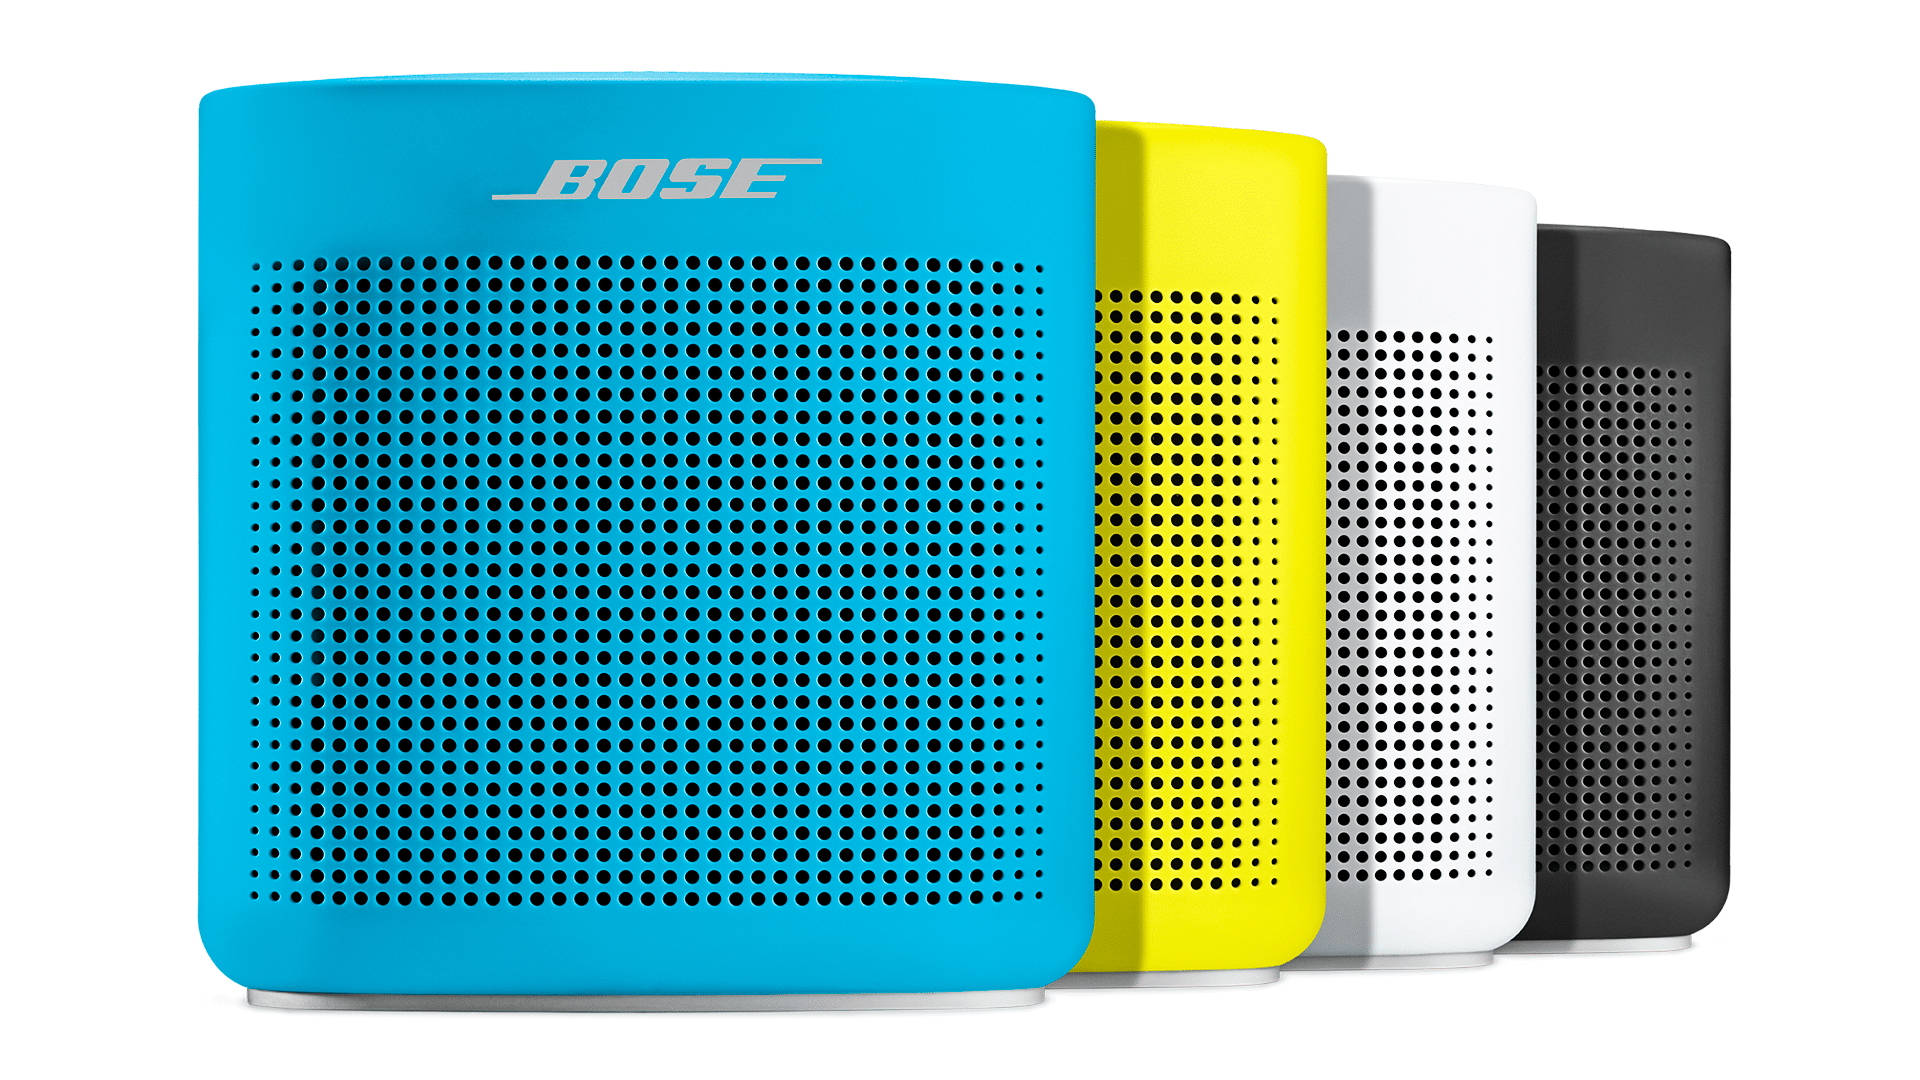 CLOSED - Win a Bose Soundlink Color II Speaker worth £129.95, with The